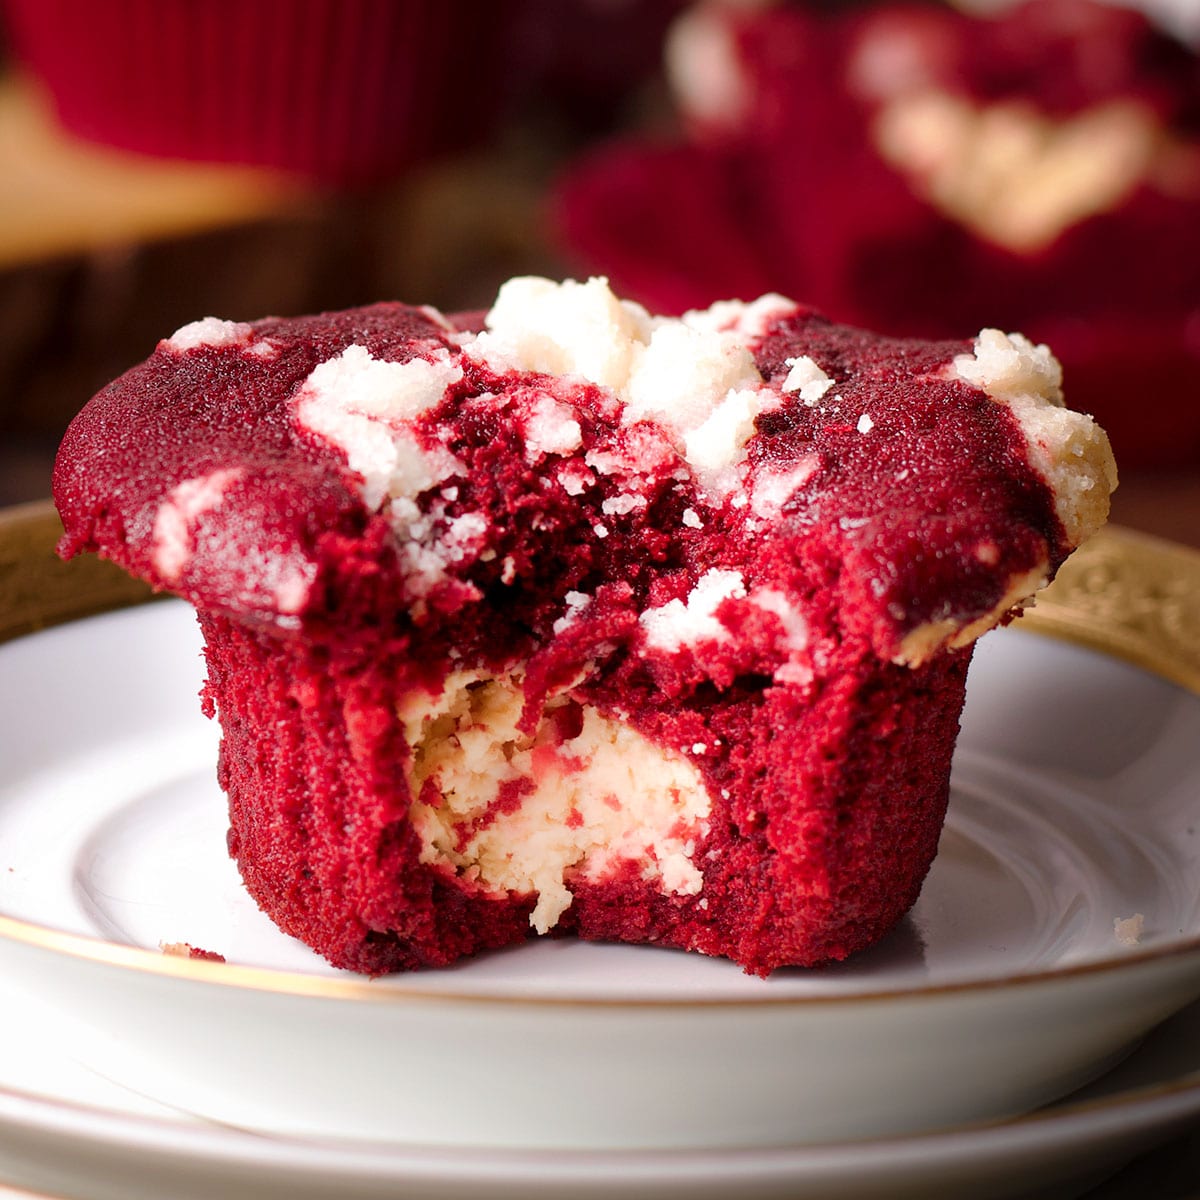 A red velvet muffin that's been broken in half to reveal the cream cheese filling in the center of the muffin.